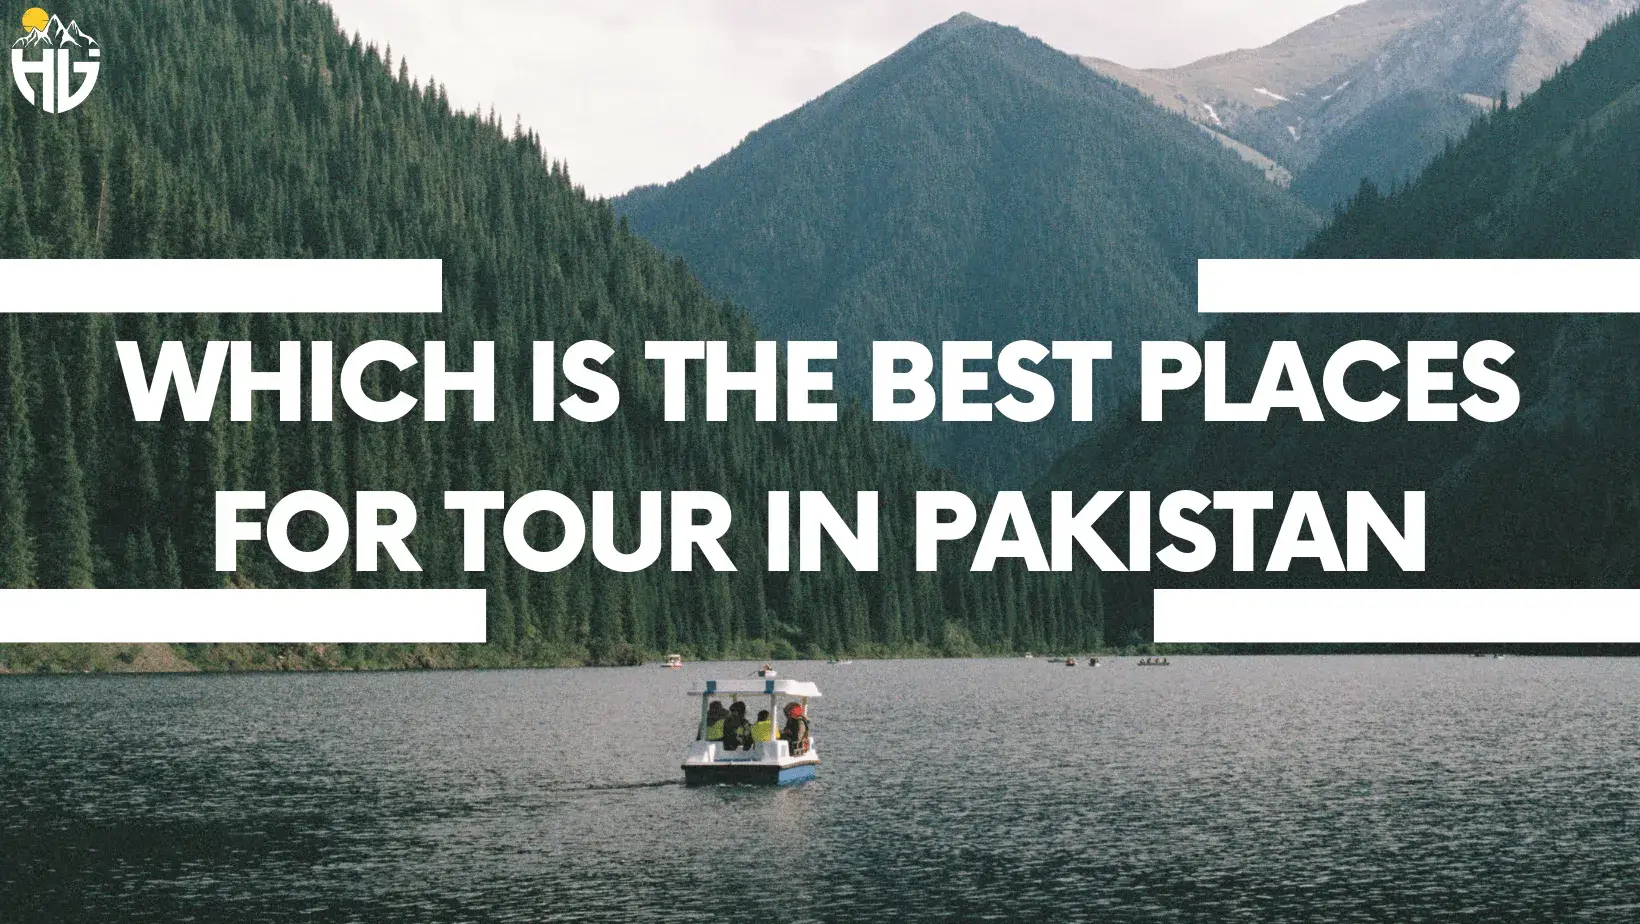 Which is the best places for tour in Pakistan